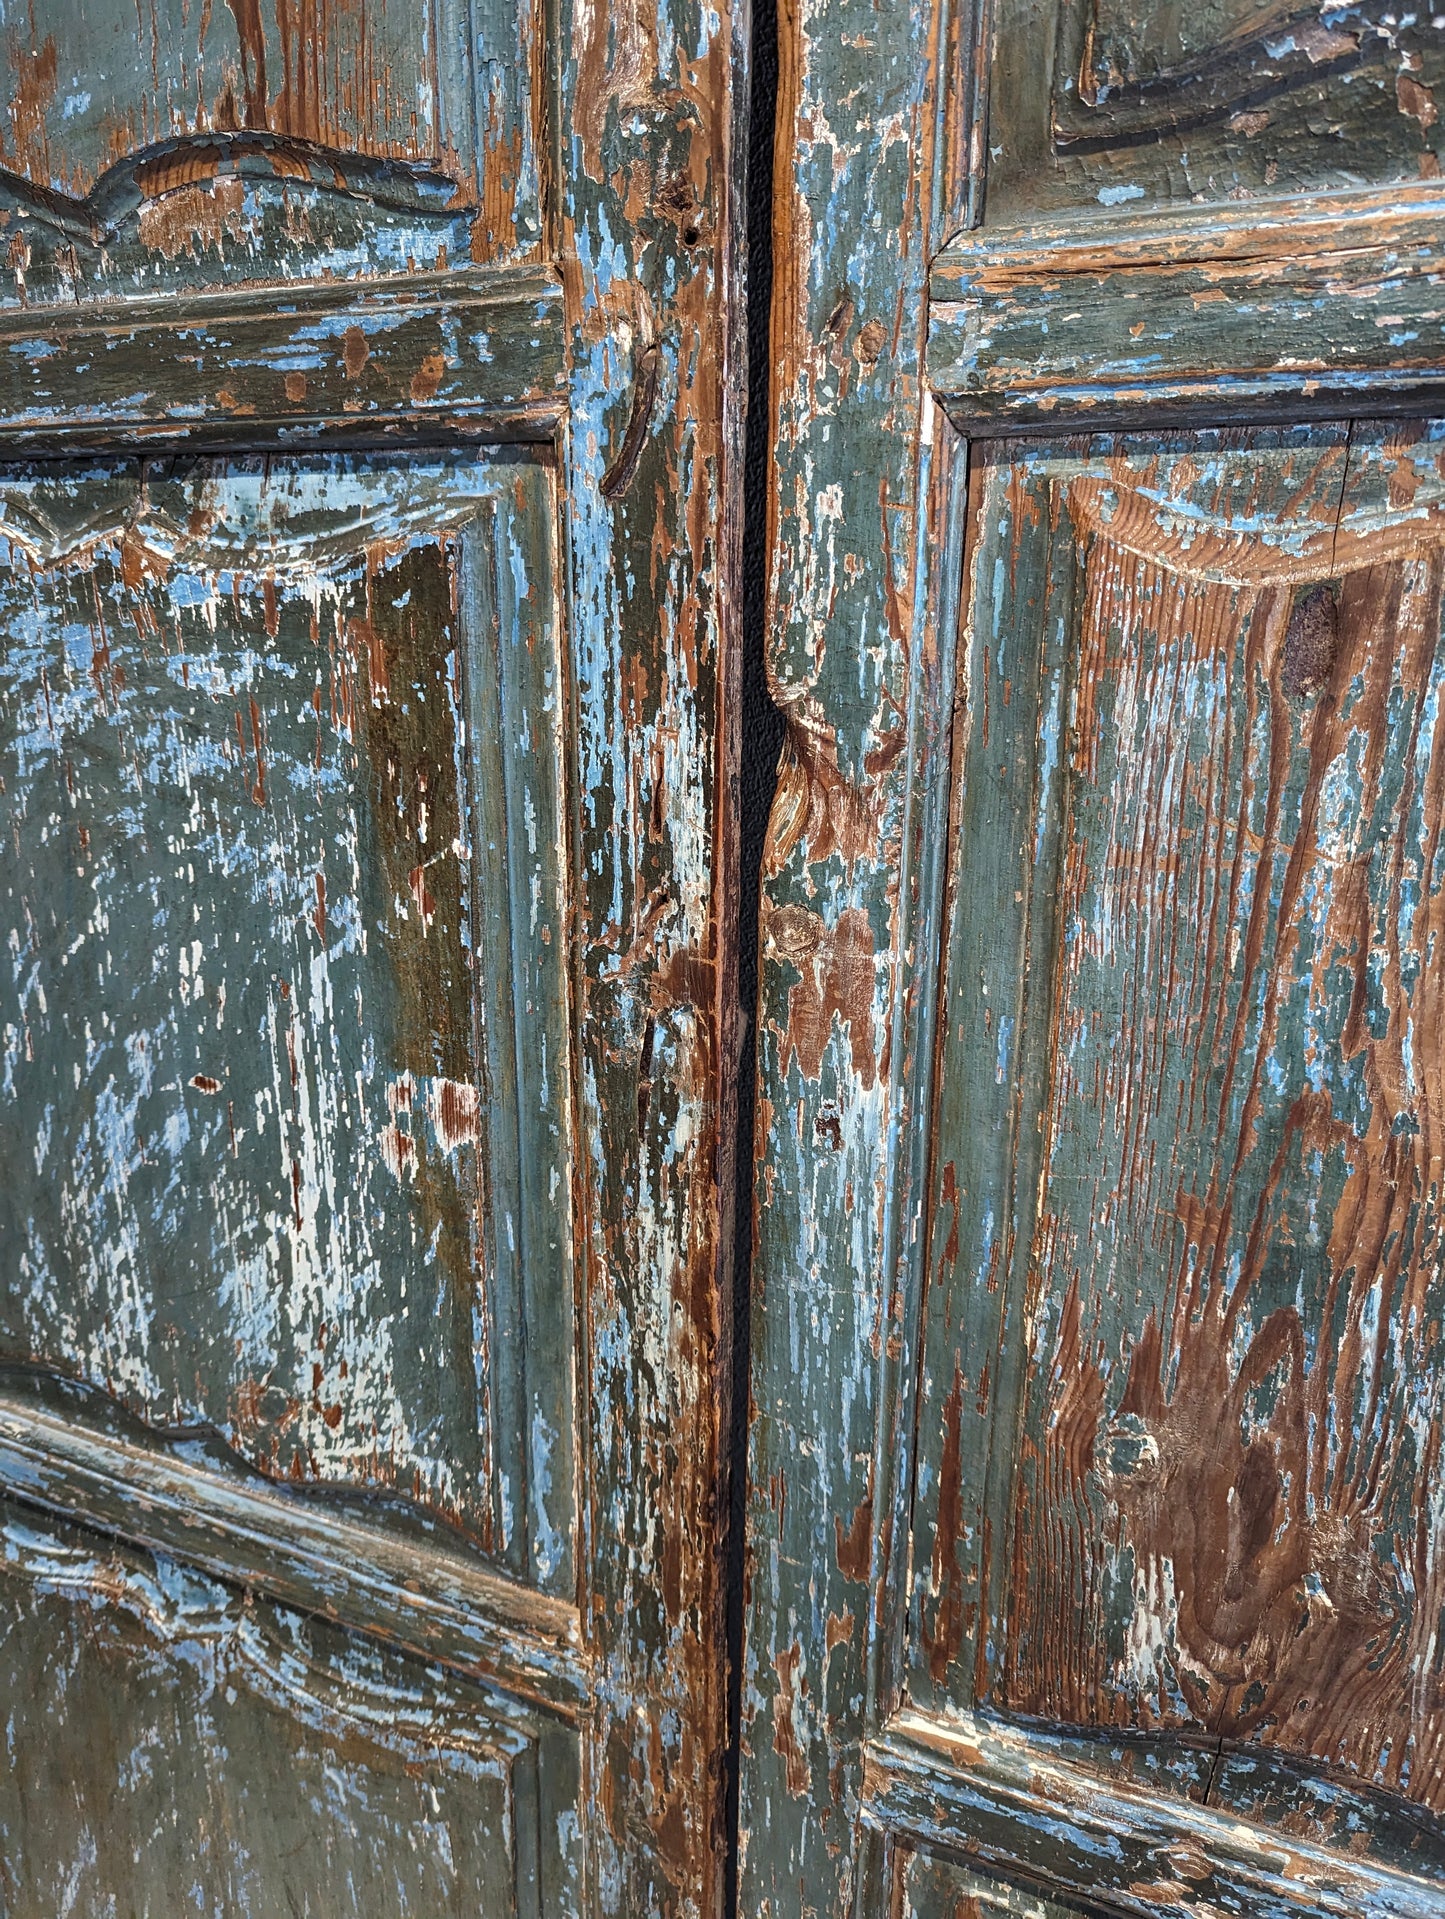 Double doors antique blue and green patina